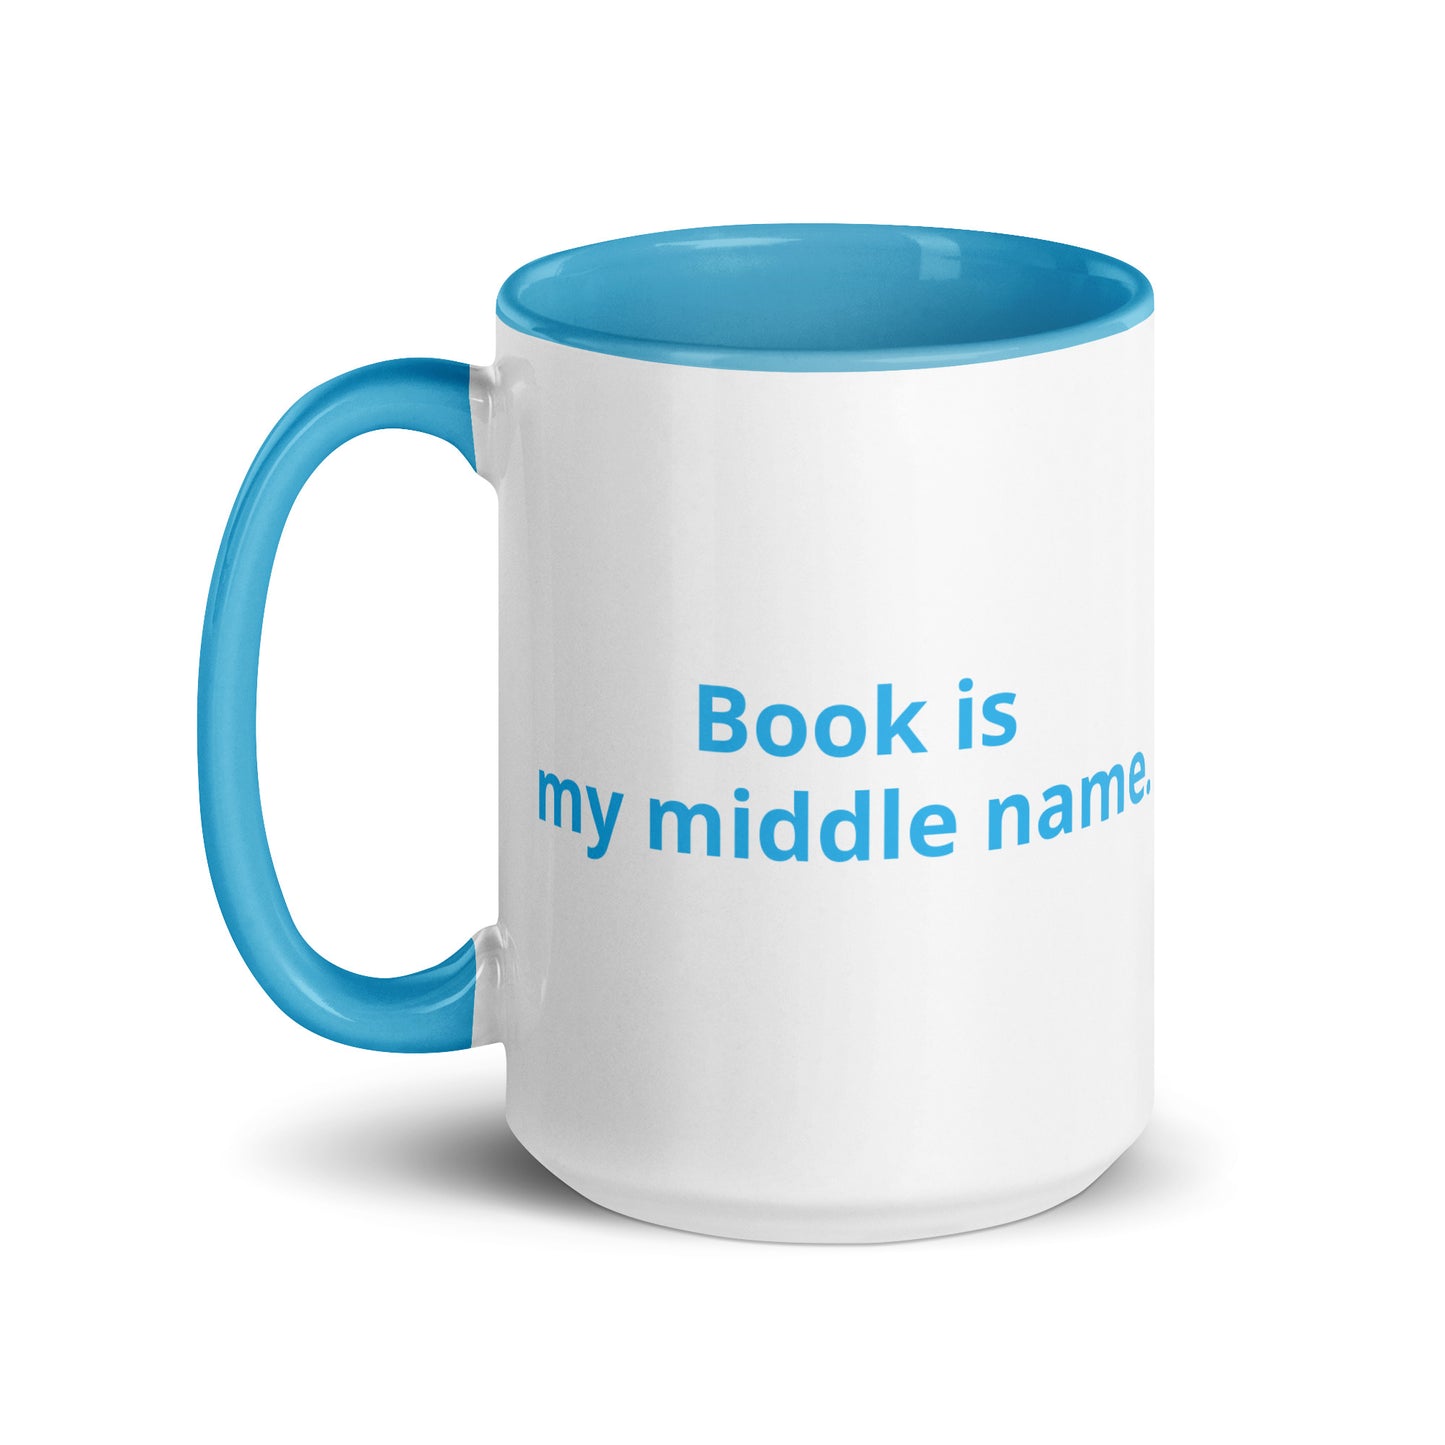 Book is my middle name.